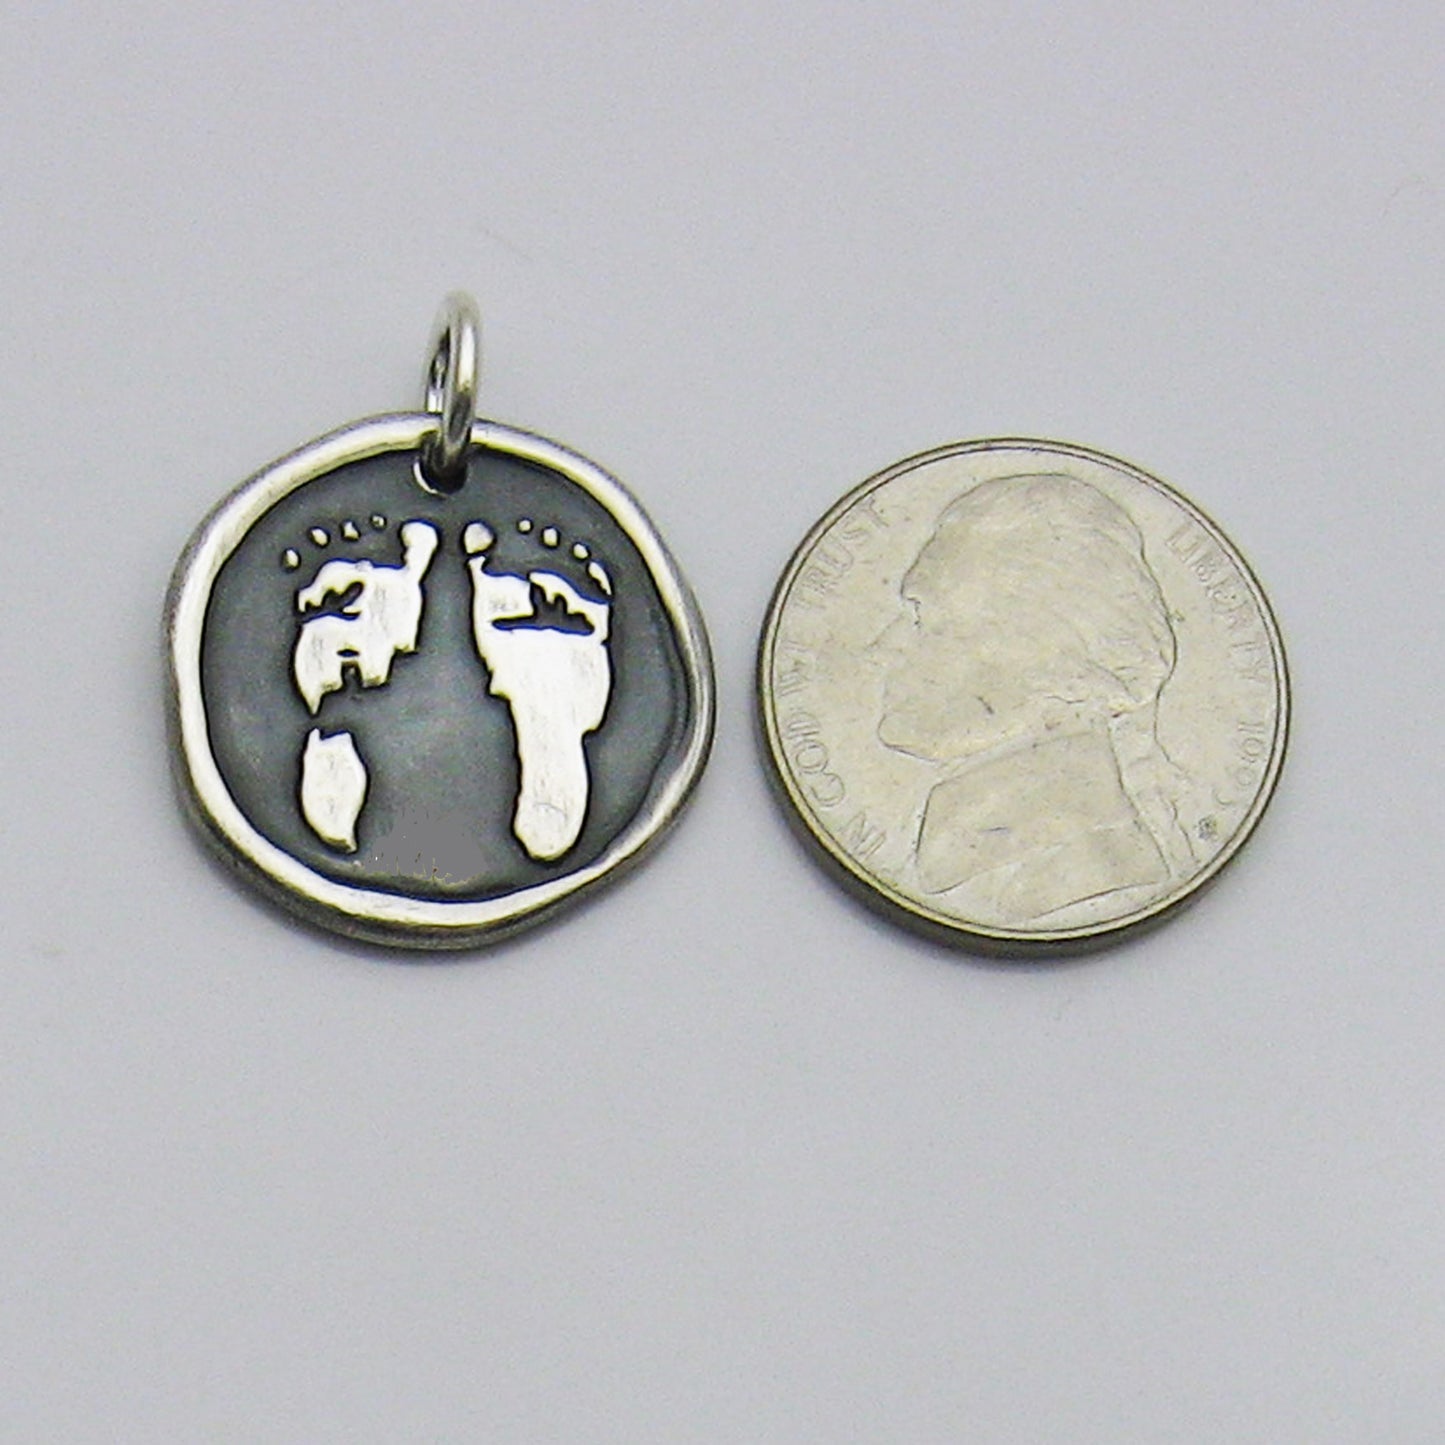 Embossed Footprint Pendant Size Reference Next to Nickel